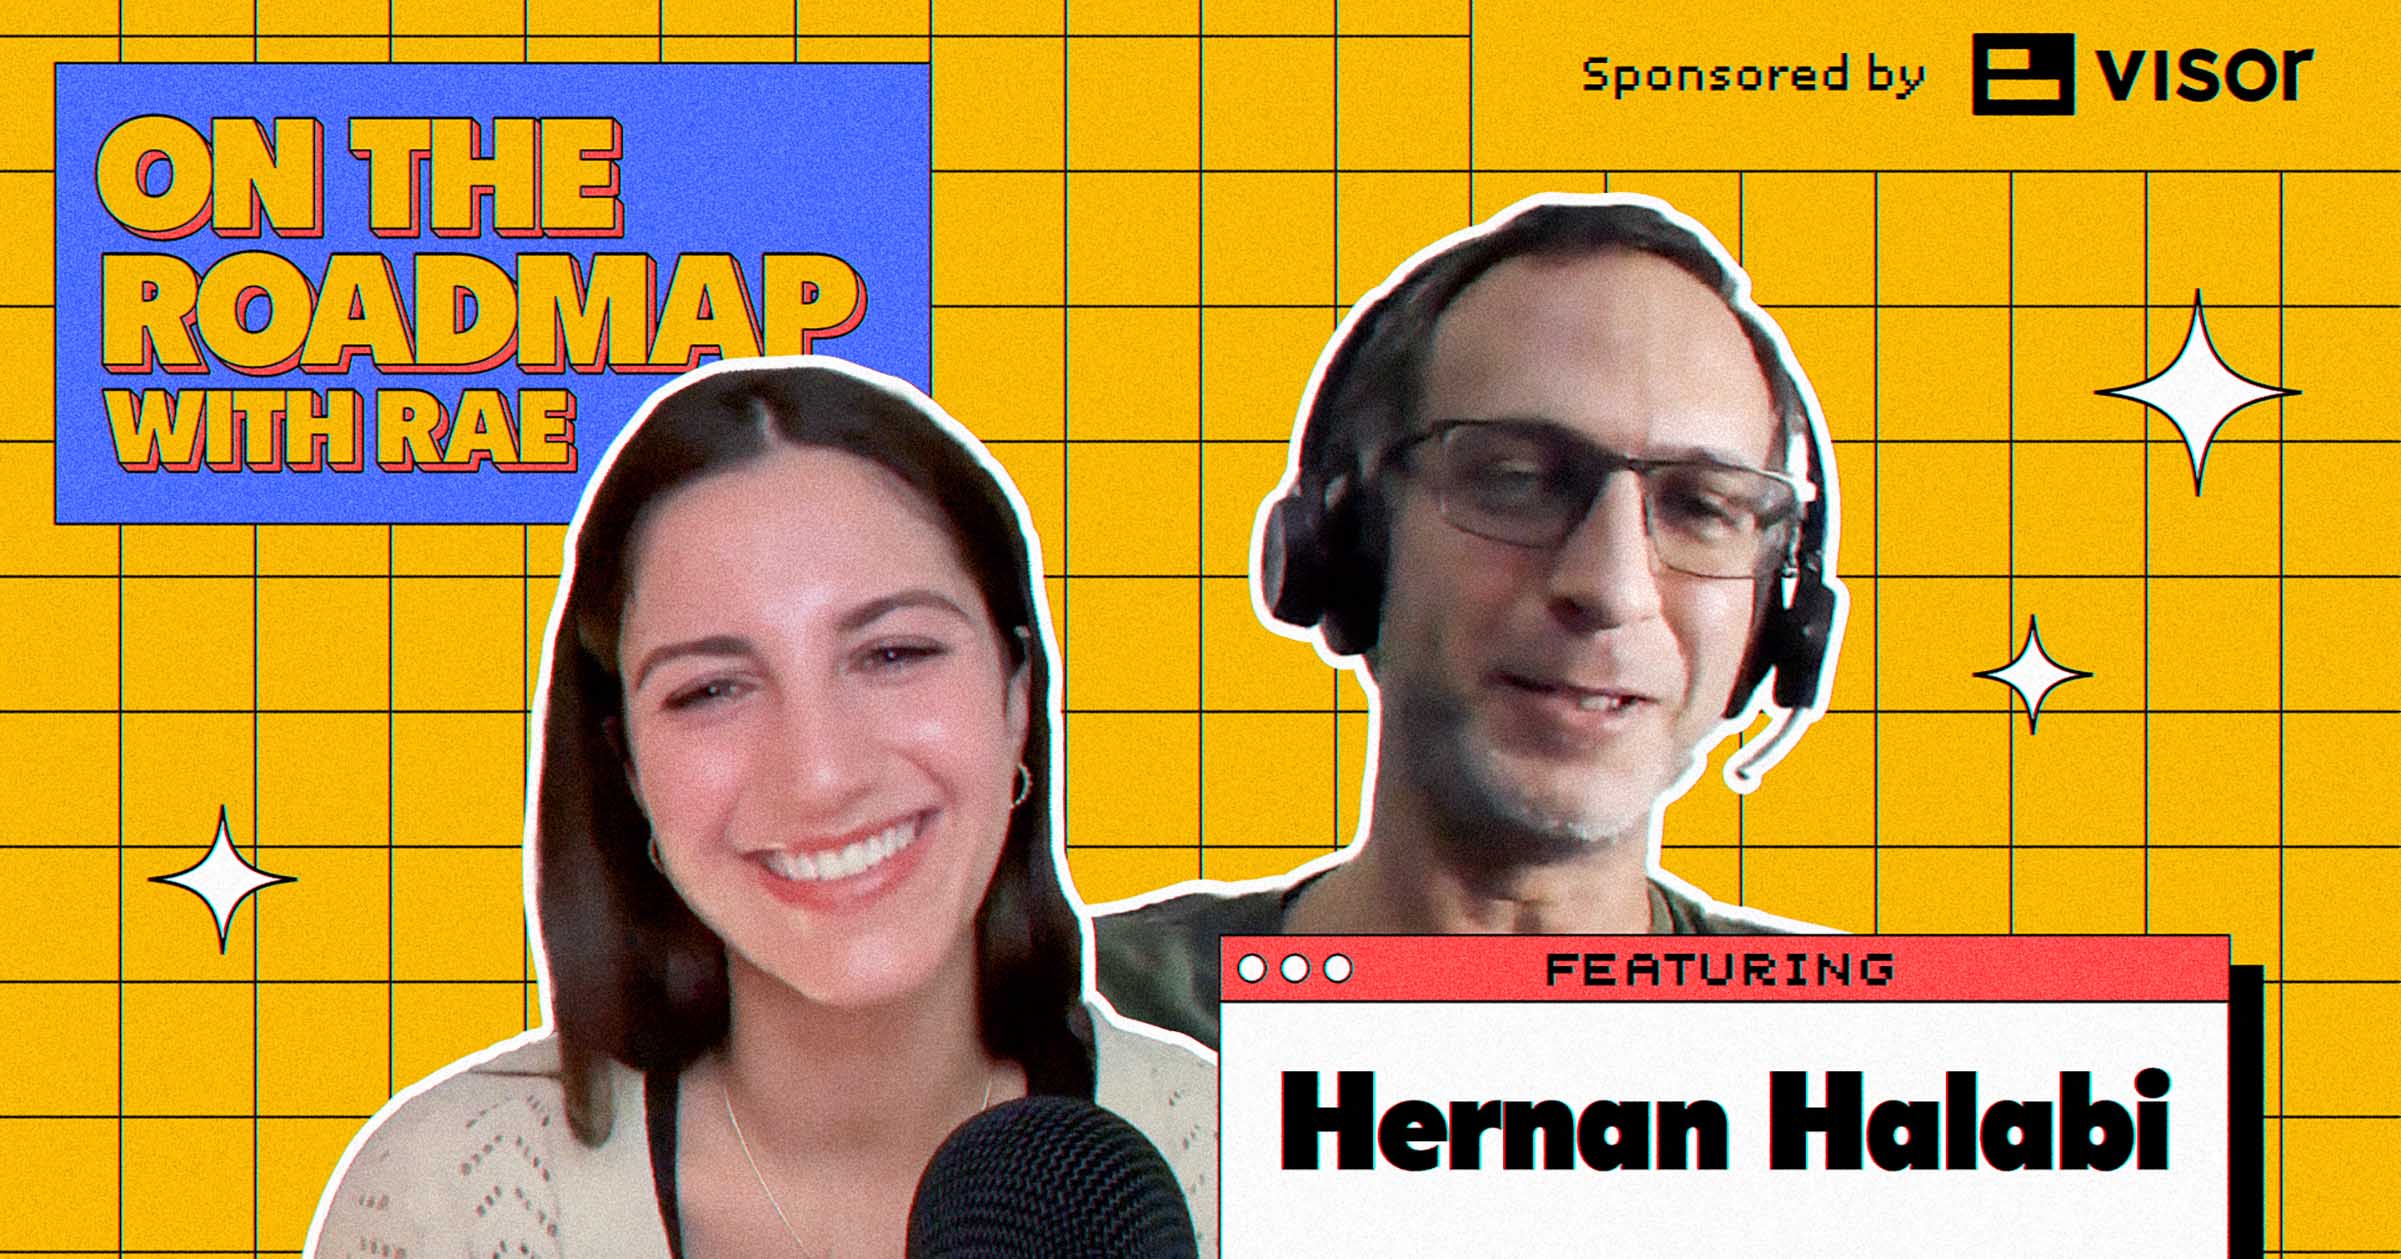 Guest Hernan Halabi joins Rae Foote on the podcast on the roadmap